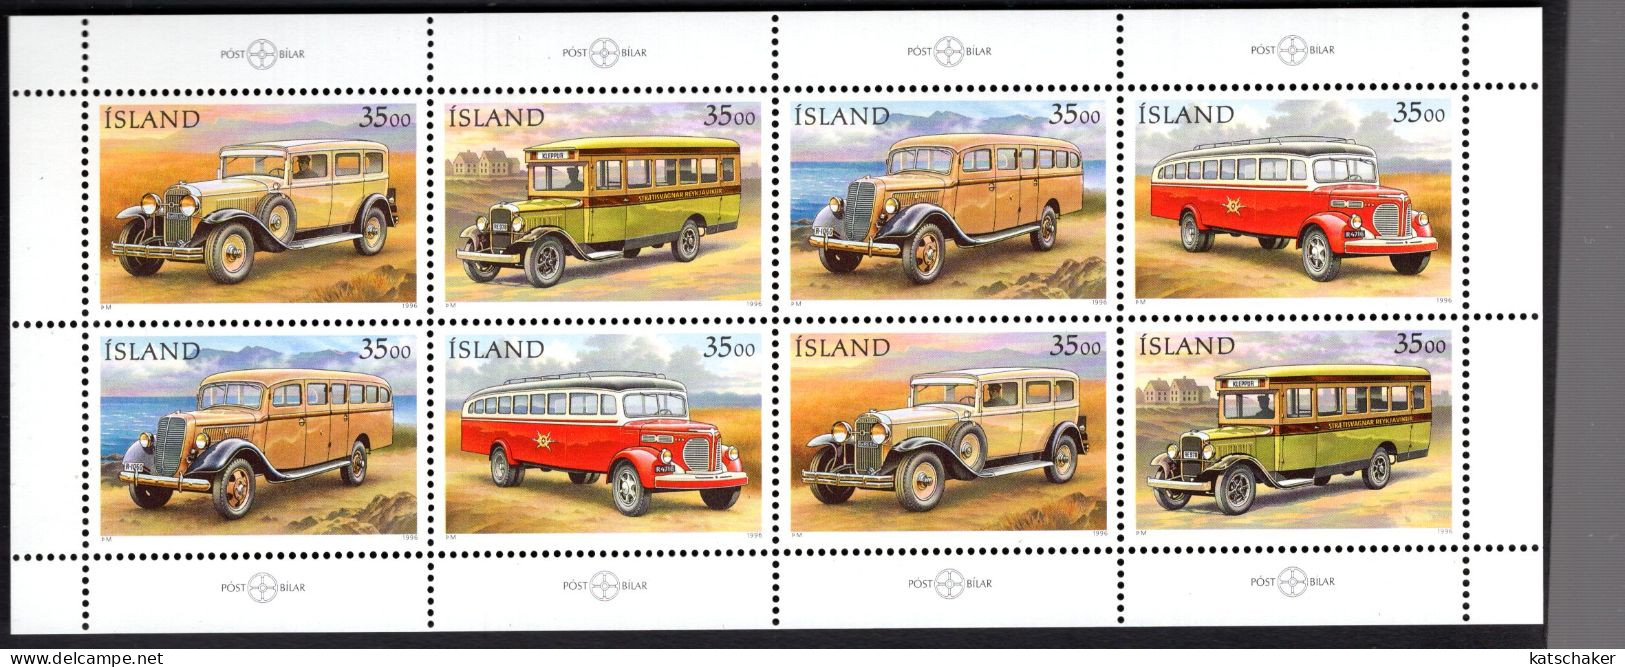 2022464234 1996 SCOTT 823A (XX)  POSTFRIS MINT NEVER HINGED - COMPLETE SHEET POSTAL VEHICLE ( 2 * 823a ) - Unused Stamps